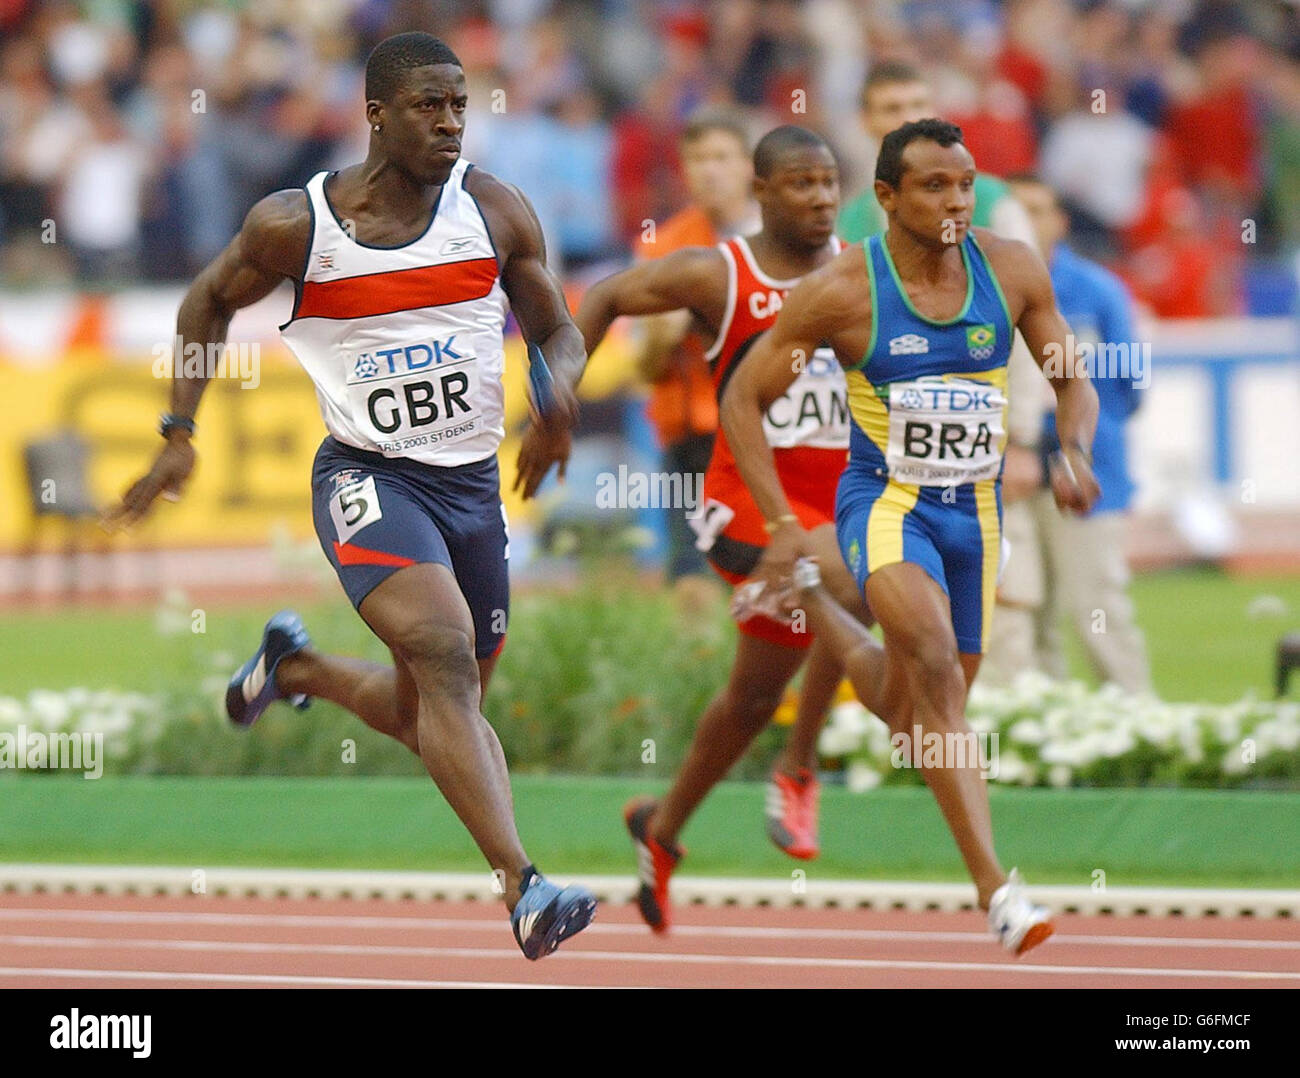 Dwain Chambers of Great Britain (left) powers home to give the GB 4x100 relay team victory in the Semi Final of the relay at the Athletics World Championships in Paris. Stock Photo